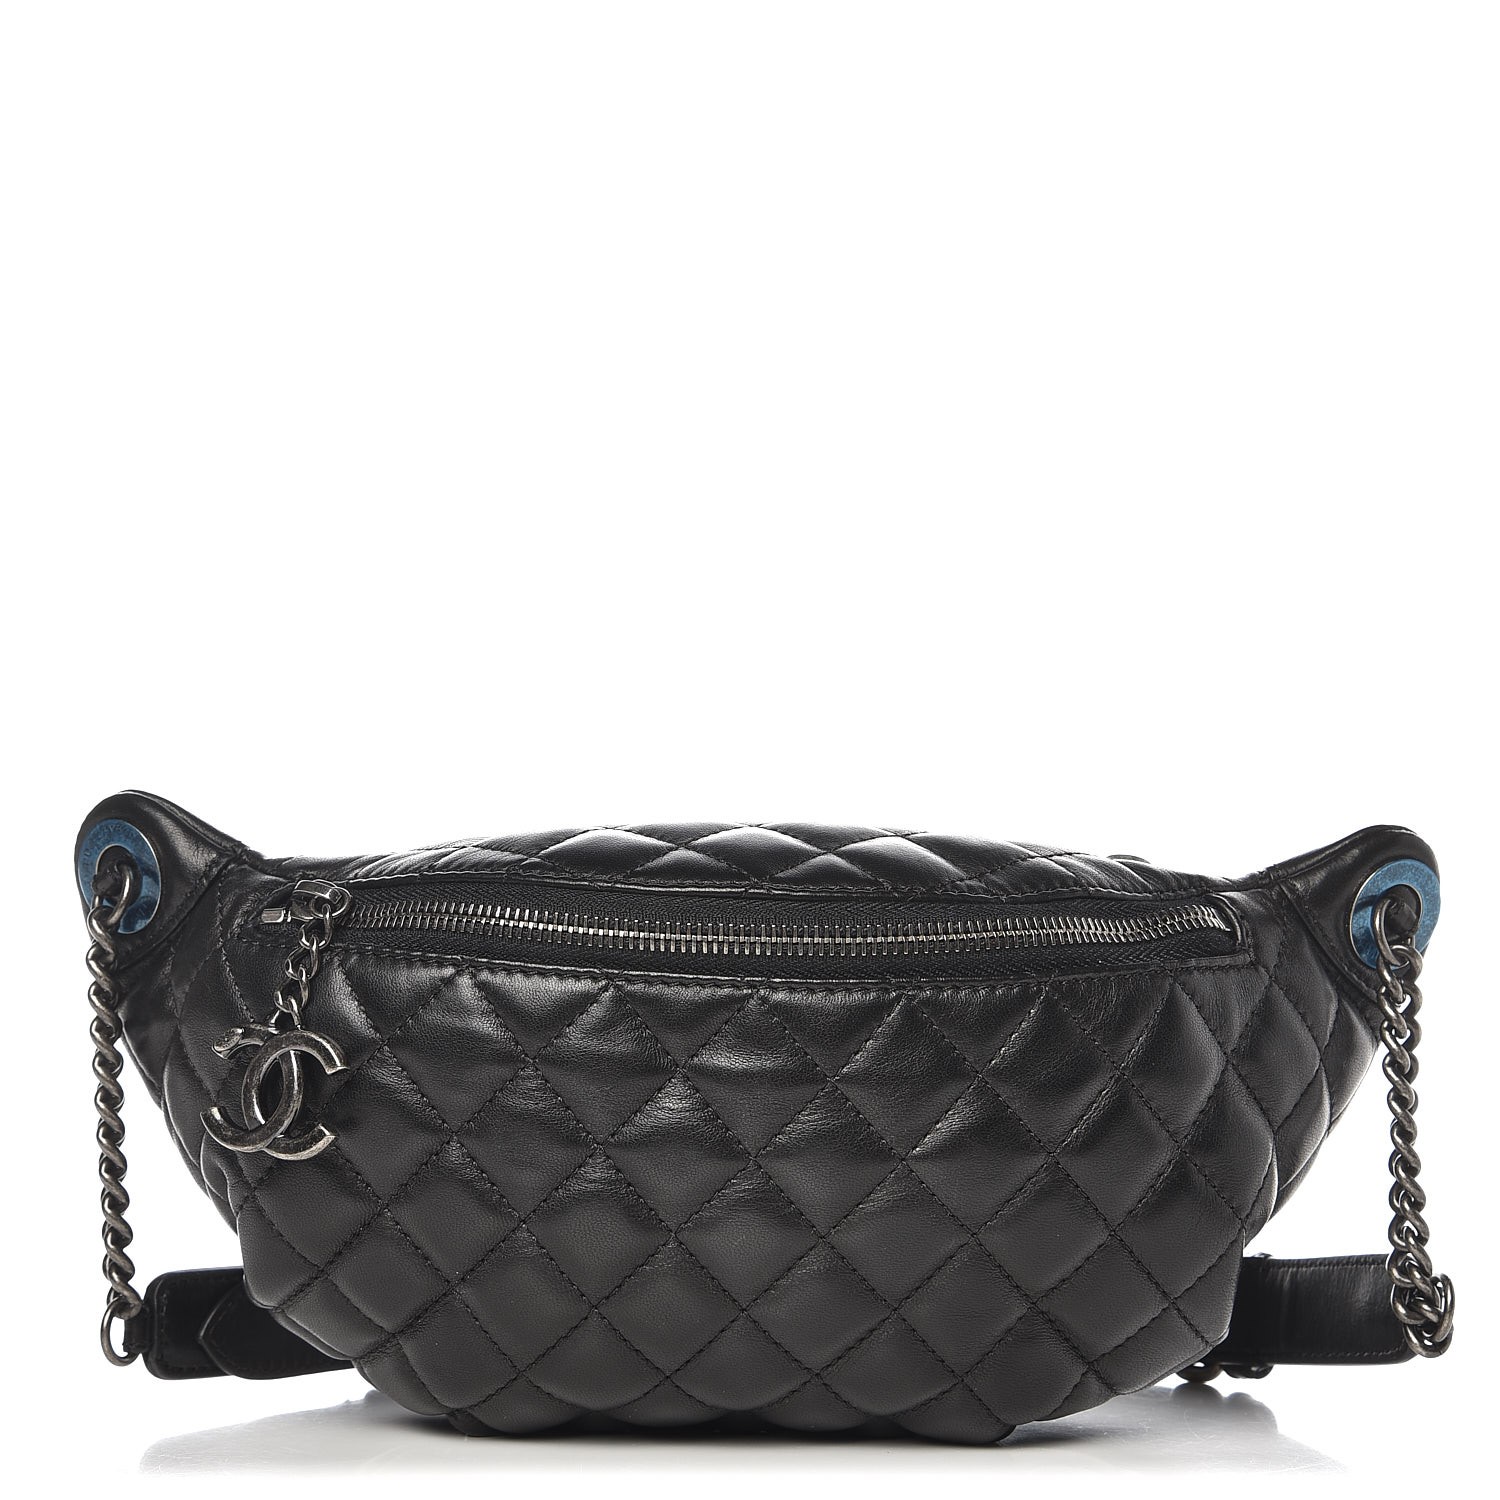 CHANEL Lambskin Quilted Banane Waist Bag Fanny Pack Black 260058